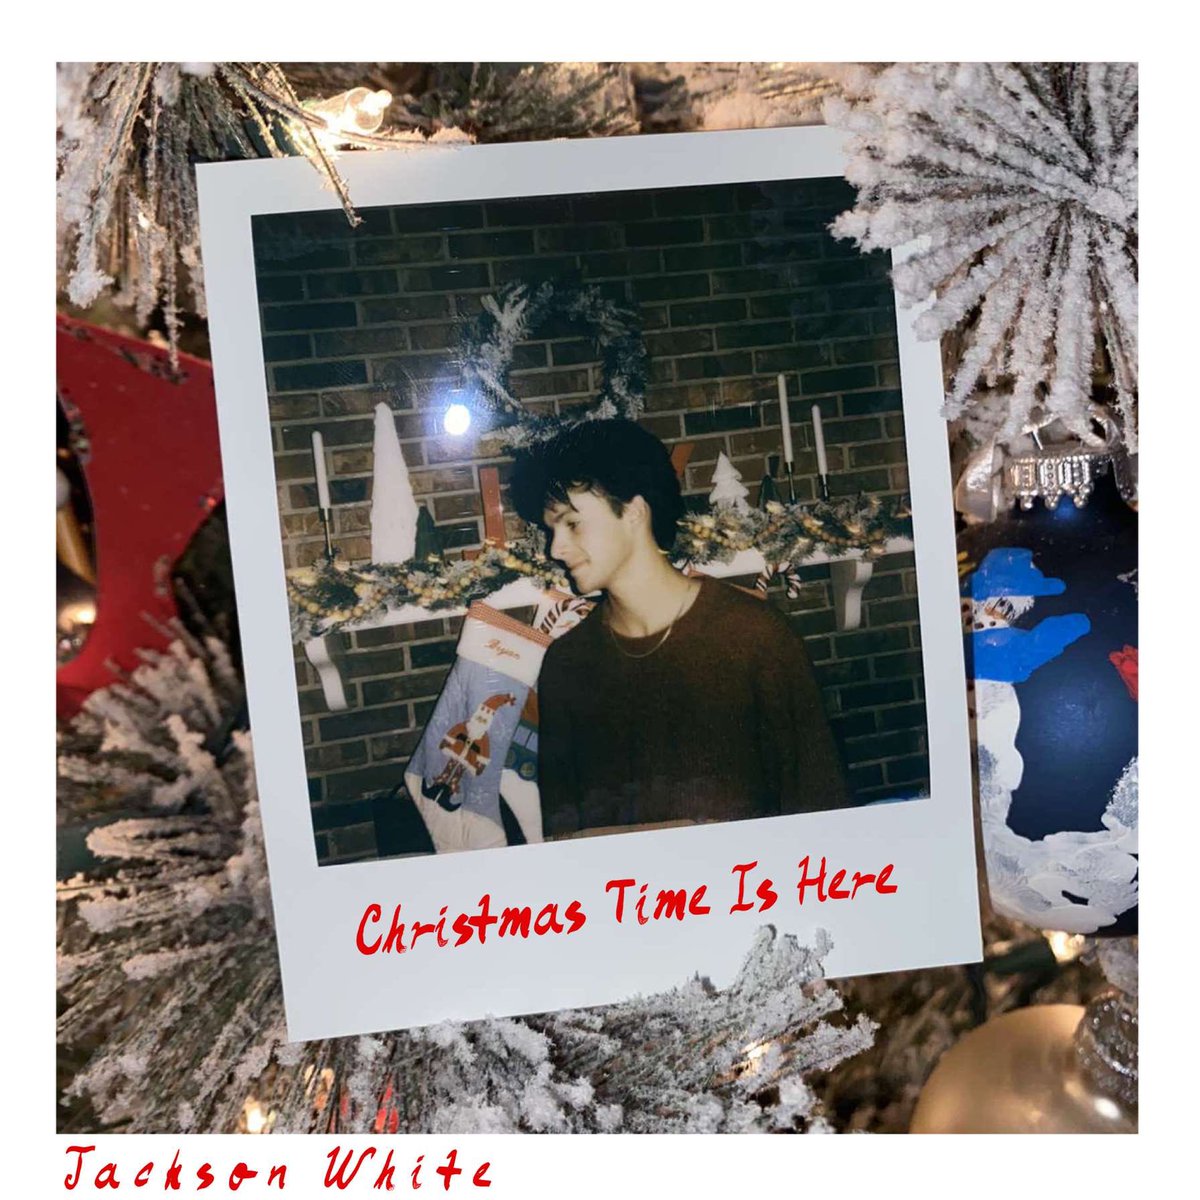 The time is here🎄The Only Gift (acoustic) + Christmas Time is Here - OUT NOW!!! Go stream on all platforms, loved working on these, thank y’all for all the support 🫶❤️🎅🏼#ChristmasMusic #HolidayMusic #newmusicfriday #theonlygift #christmastimeishere